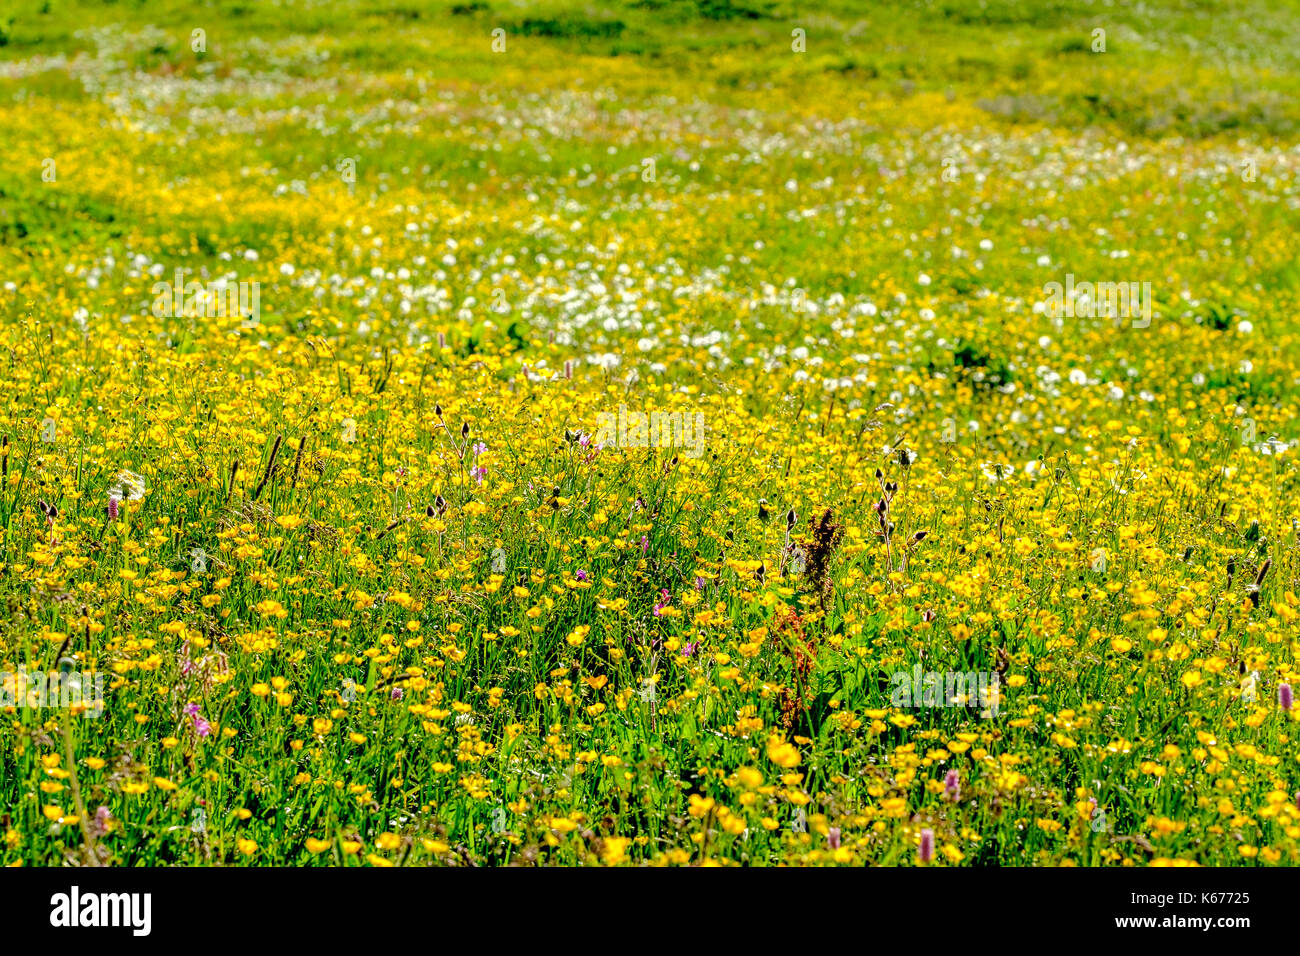 Green Meadows With Colorful Flowers On The Mountain Slopes At Alp Flix